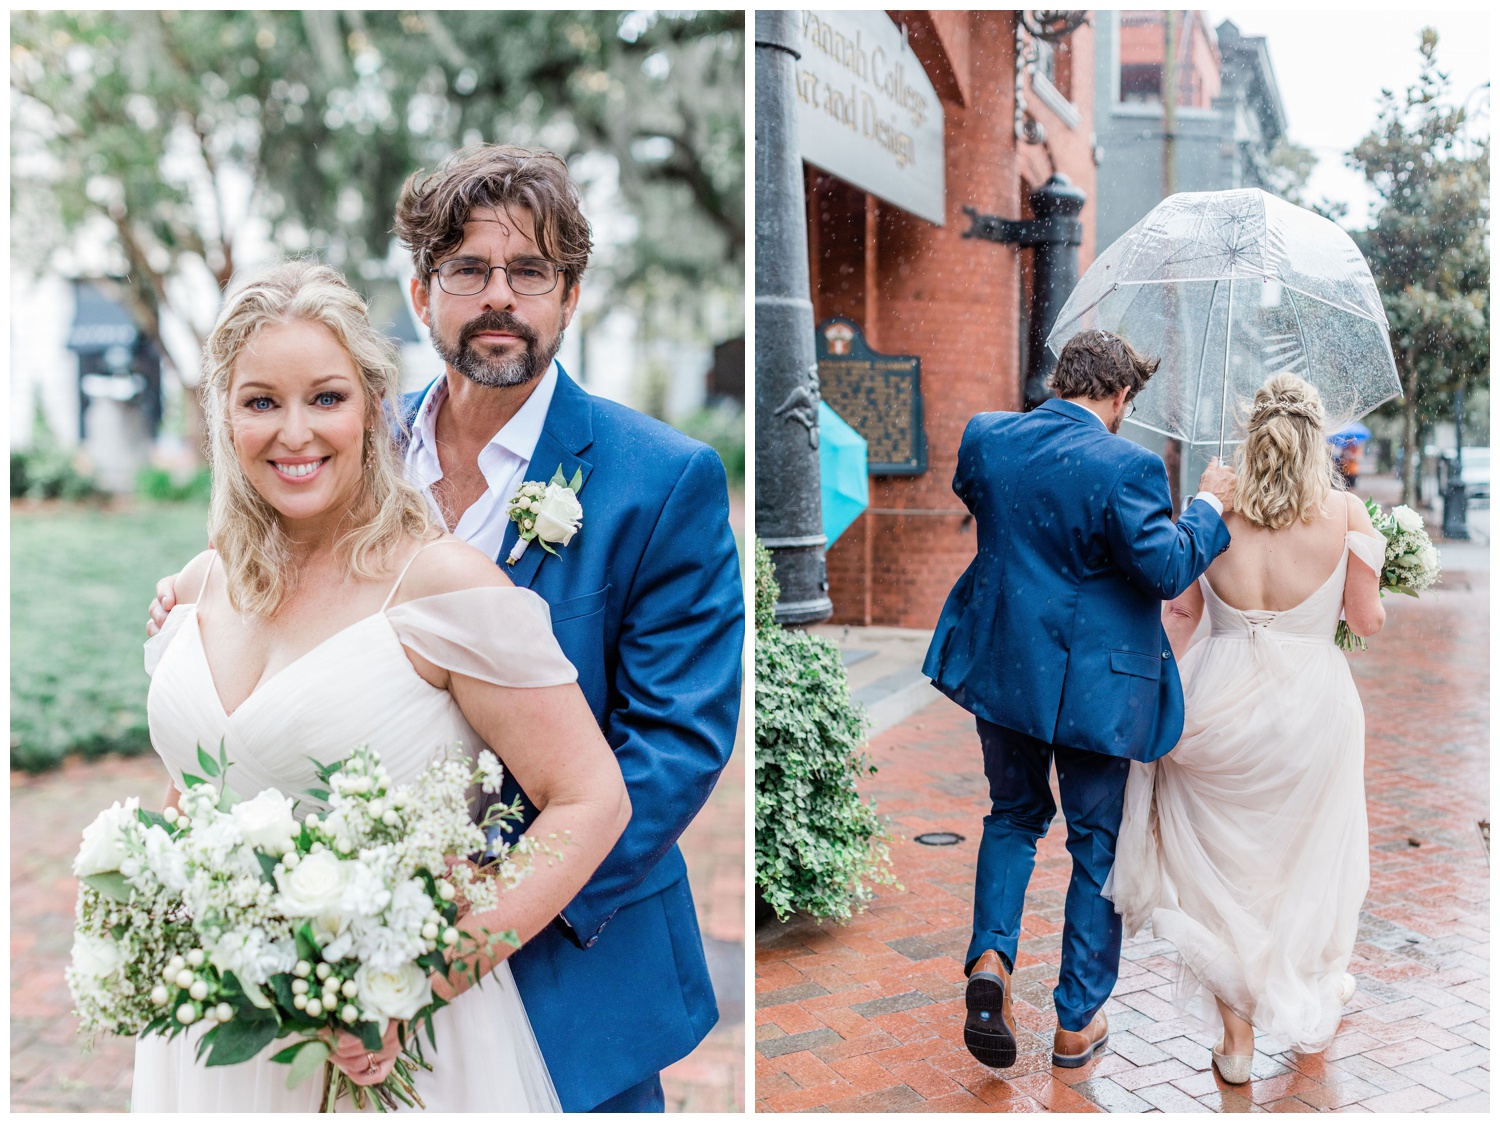 Rainy couples portraits in Savannah GA with the Savannah Elopement Package